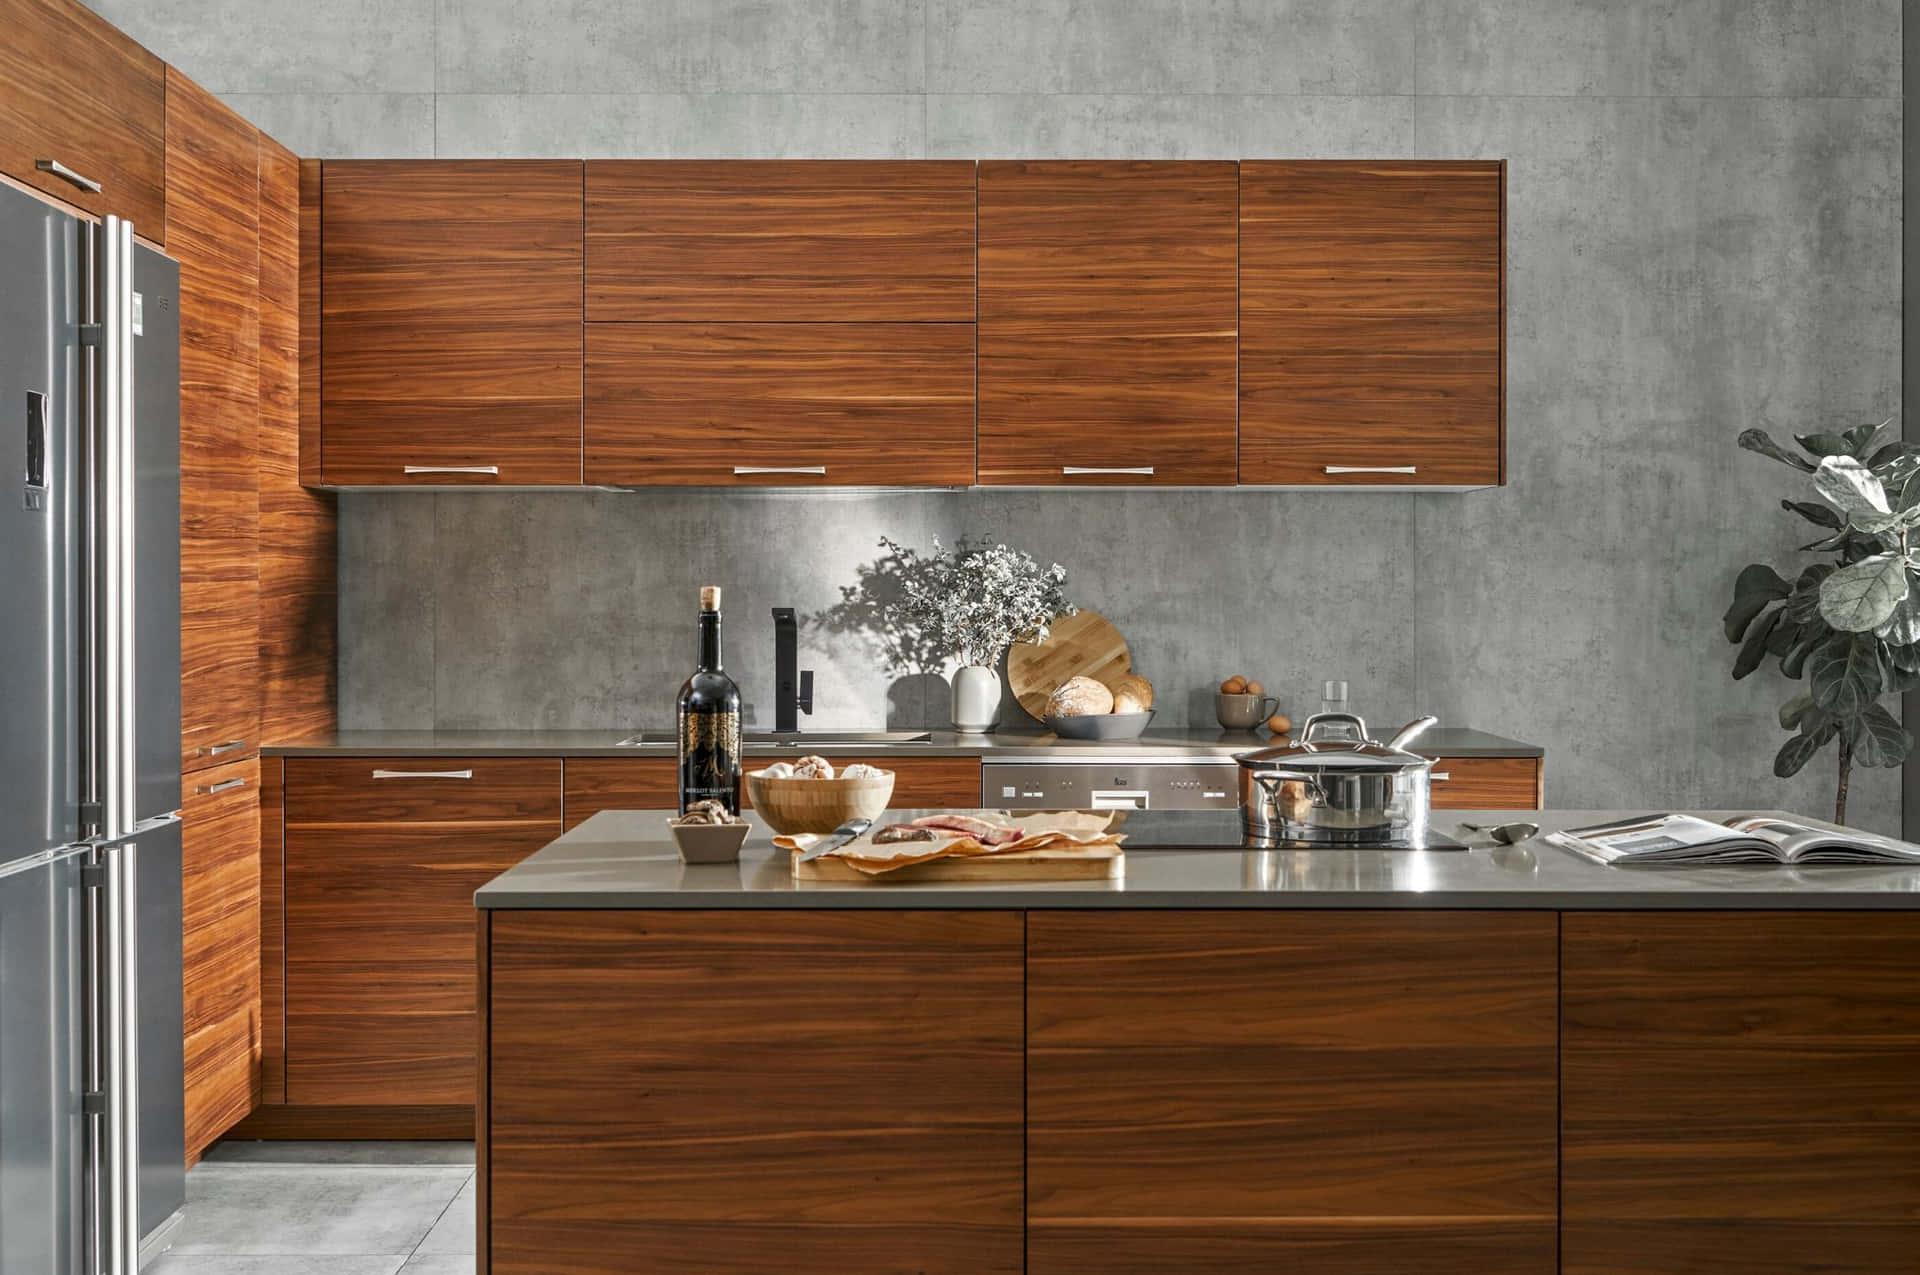 A Kitchen With Wooden Cabinets And A Stainless Steel Refrigerator